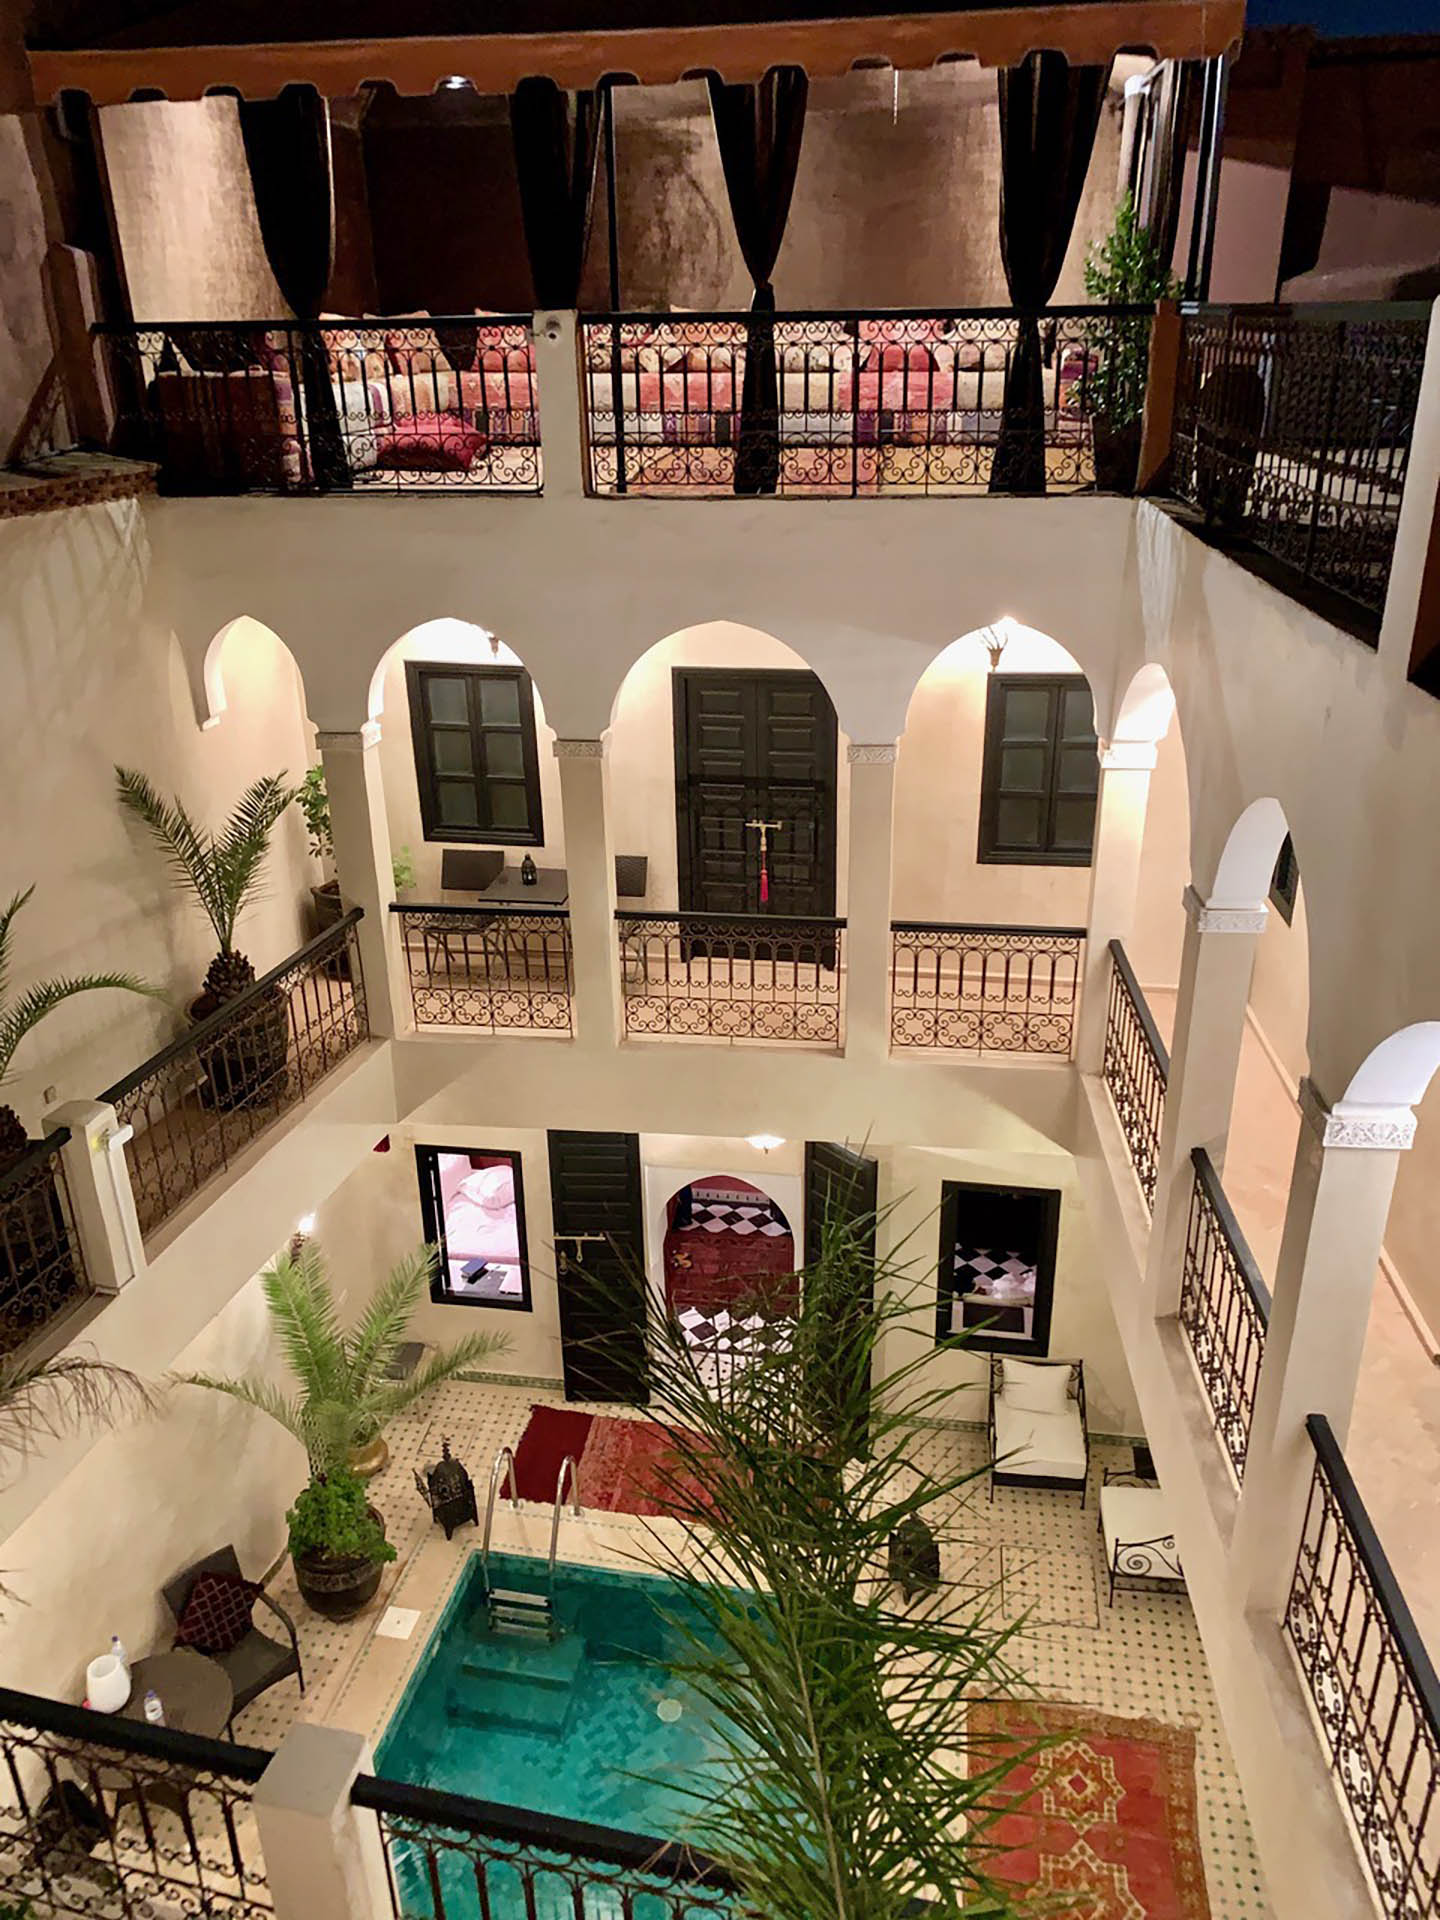 Riad Baya, view of interior courtyard with pool from upper level evening